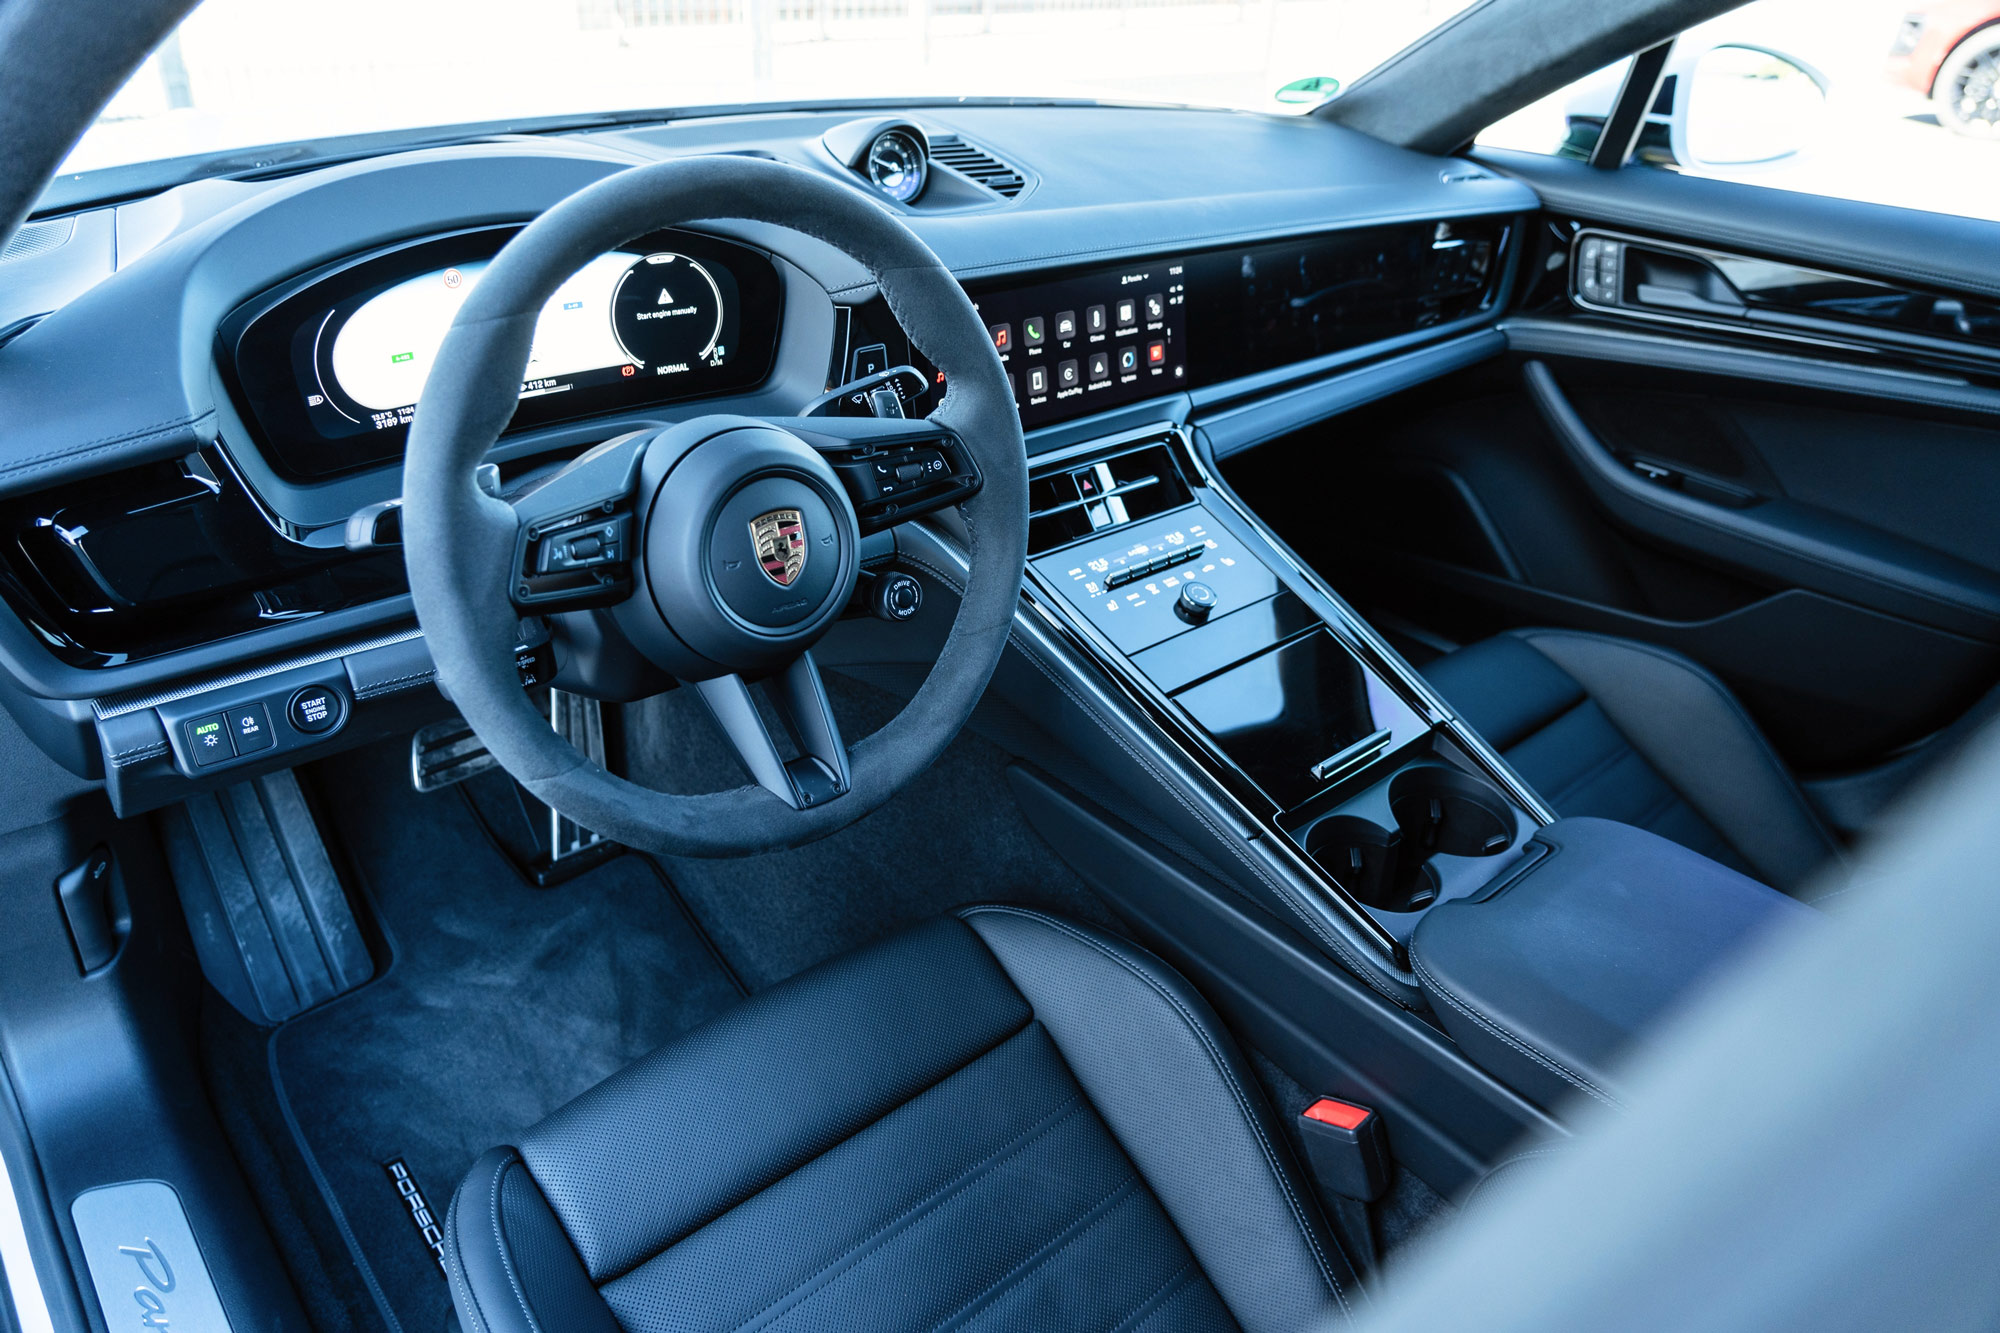 2024 Porsche Panamera interior, dashboard, and black leather front seats